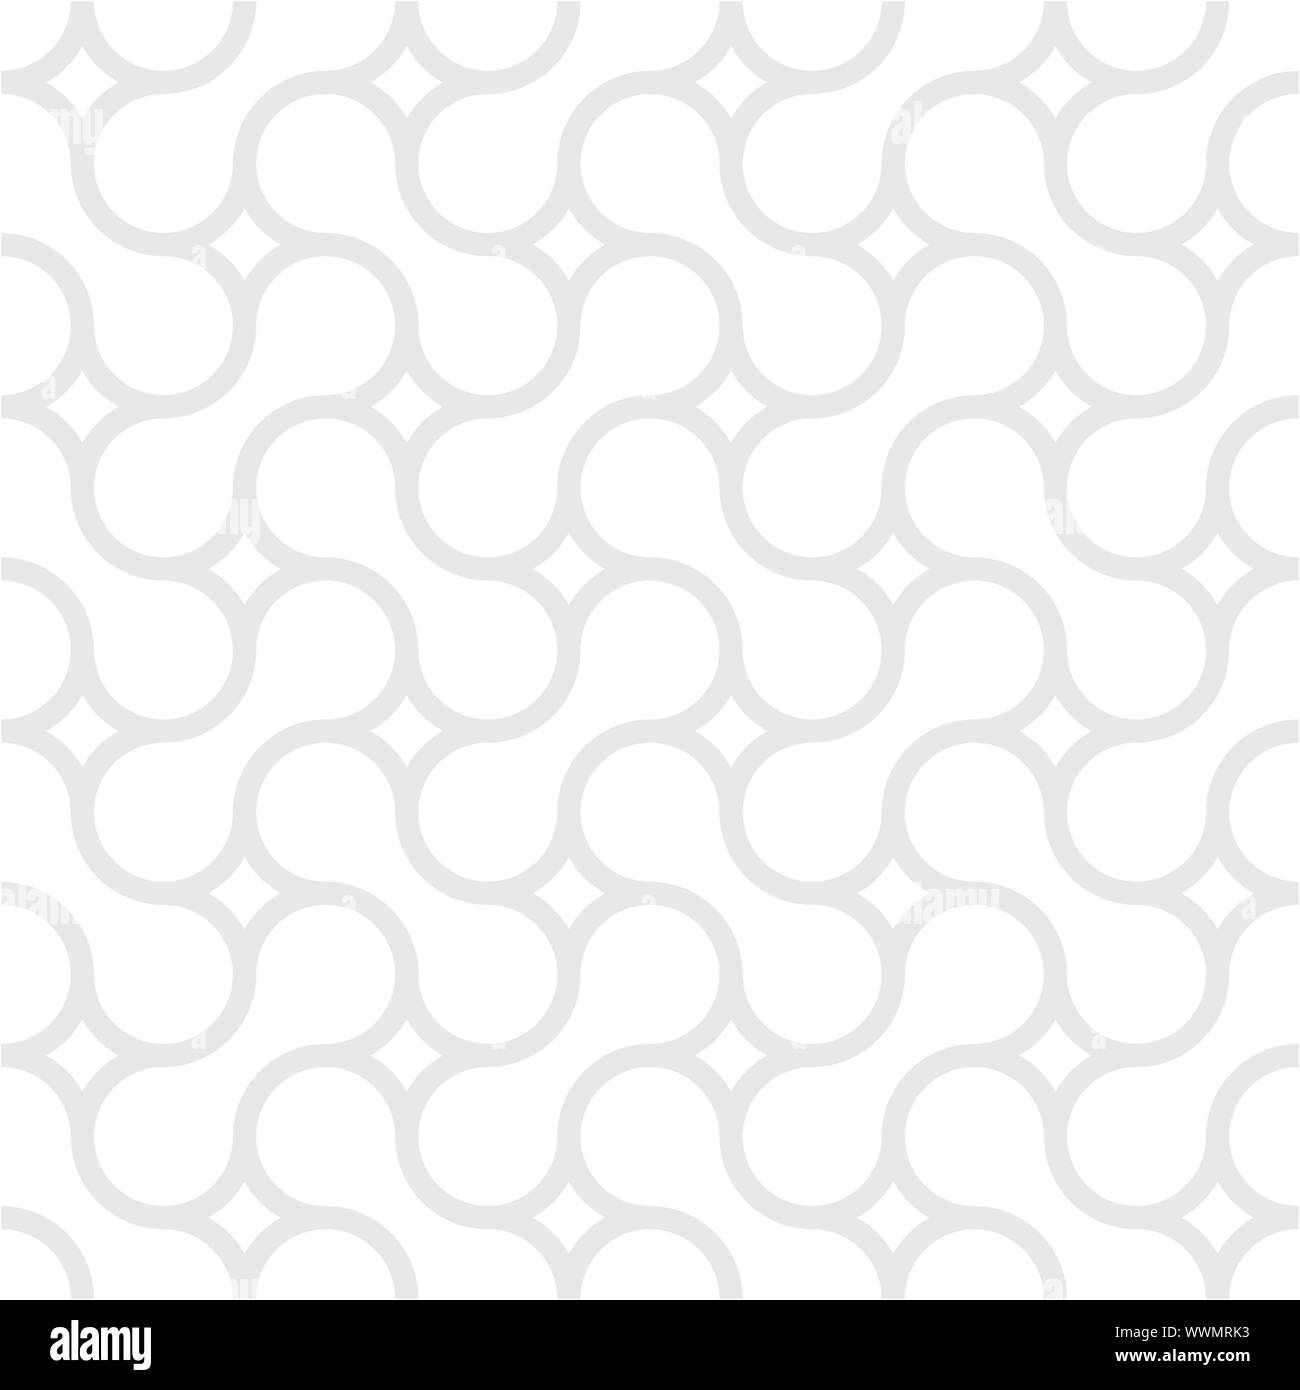 Monochrome pattern - gray curved lines Stock Vector